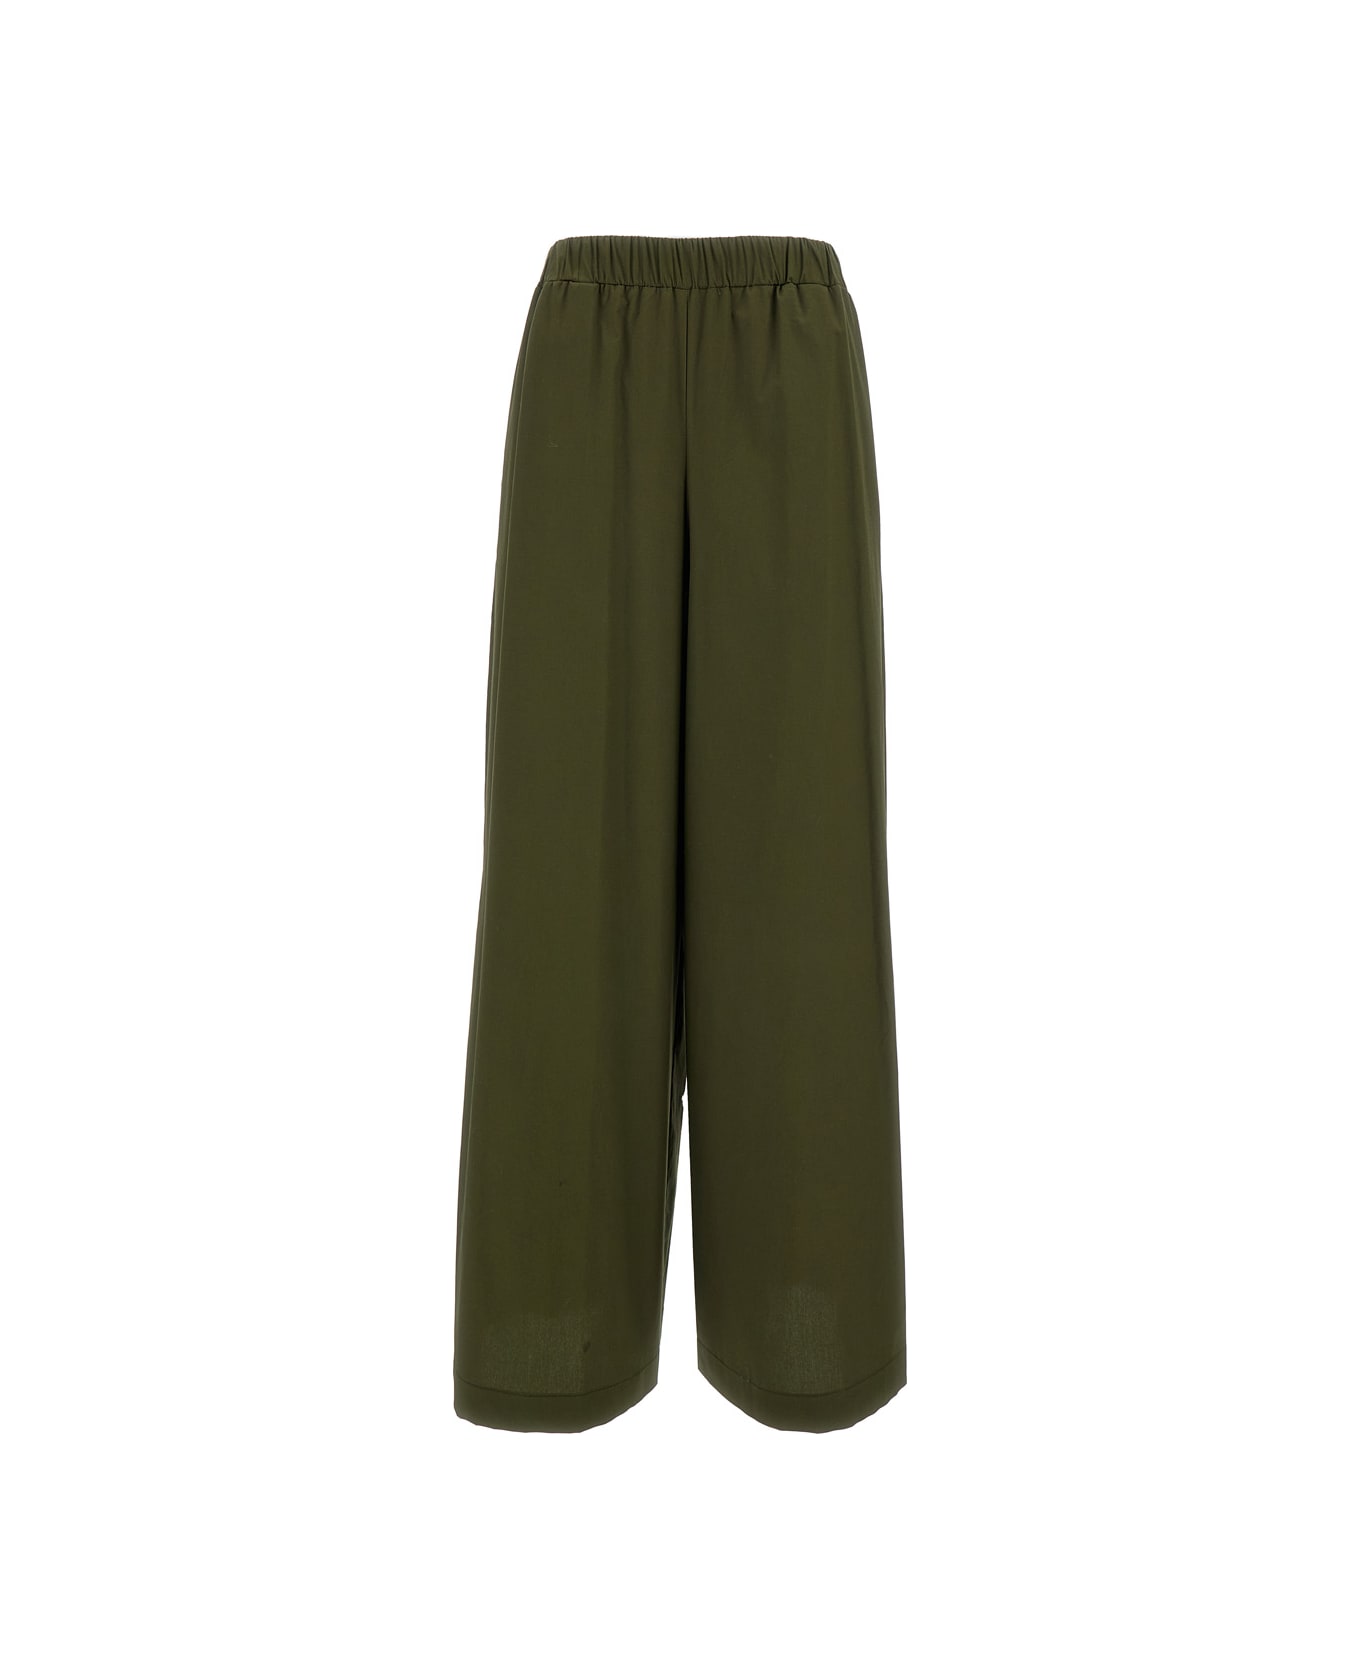 Federica Tosi Green Elastic High-waisted Pants In Stretch Cotton Woman - Green